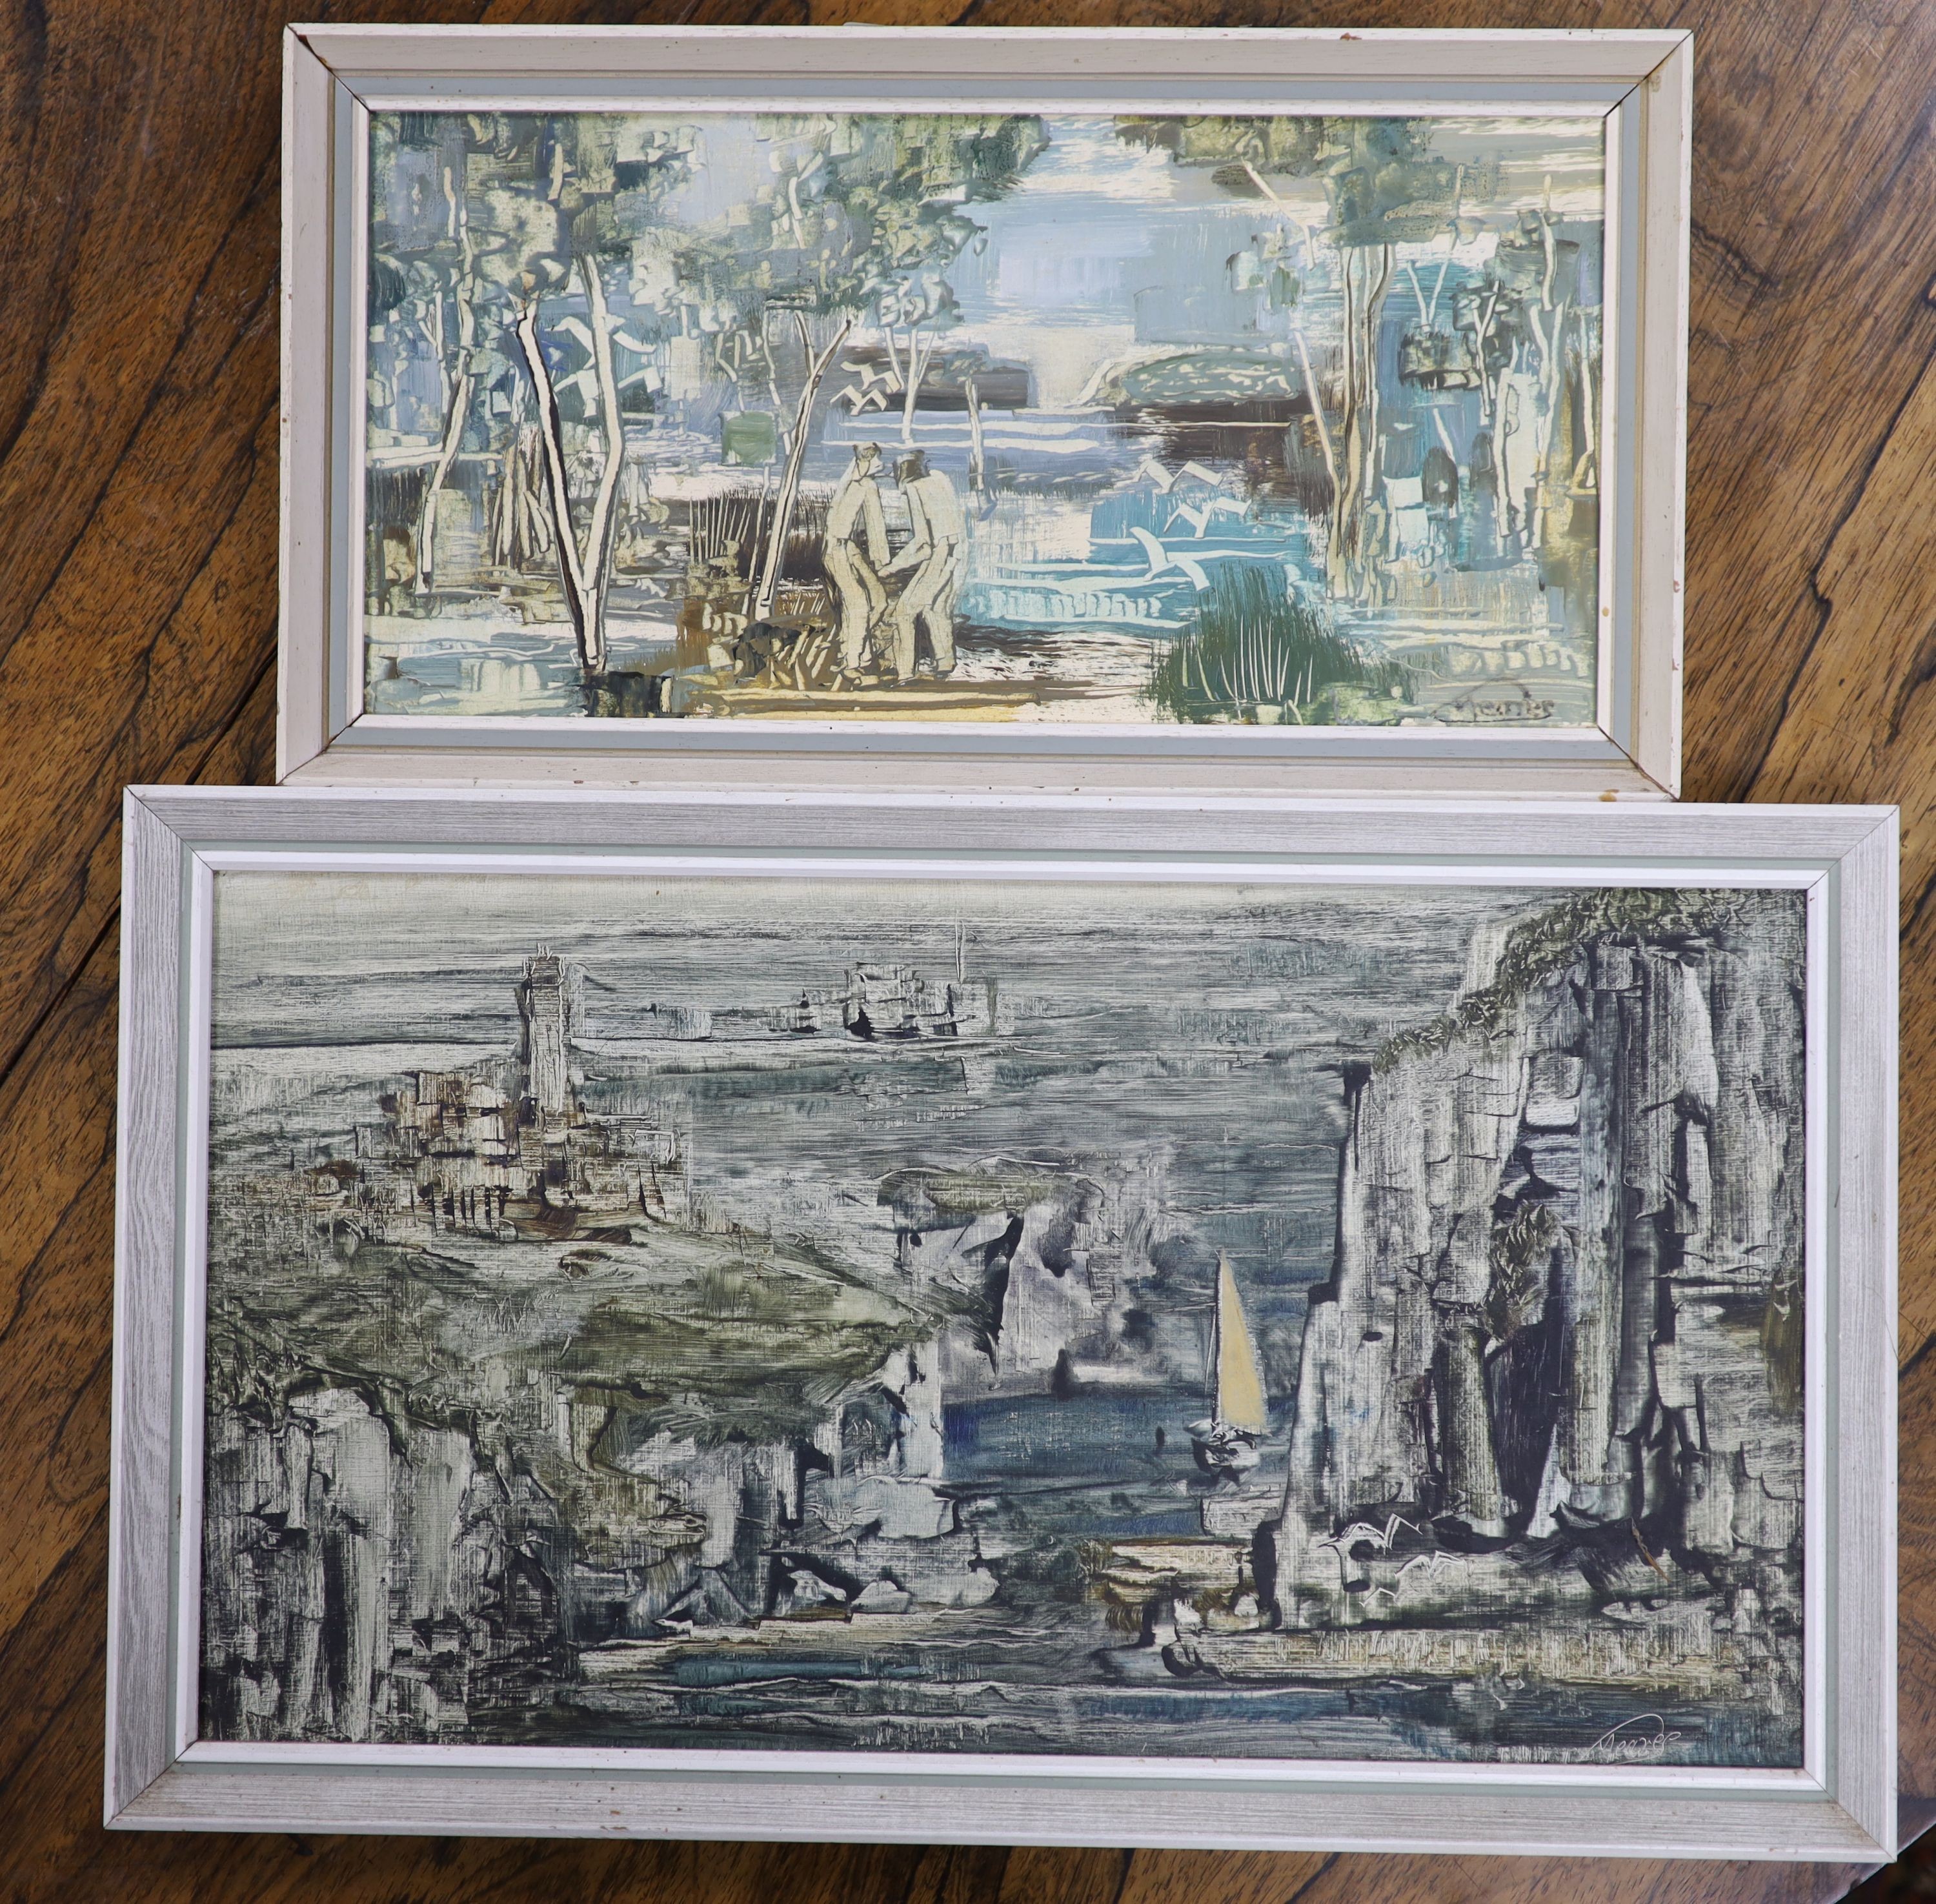 Gerald Meares (1911-1975), two oils on board, Coastal scene and Figures in a landscape, signed, 24 x 45cm and 17 x 34cm